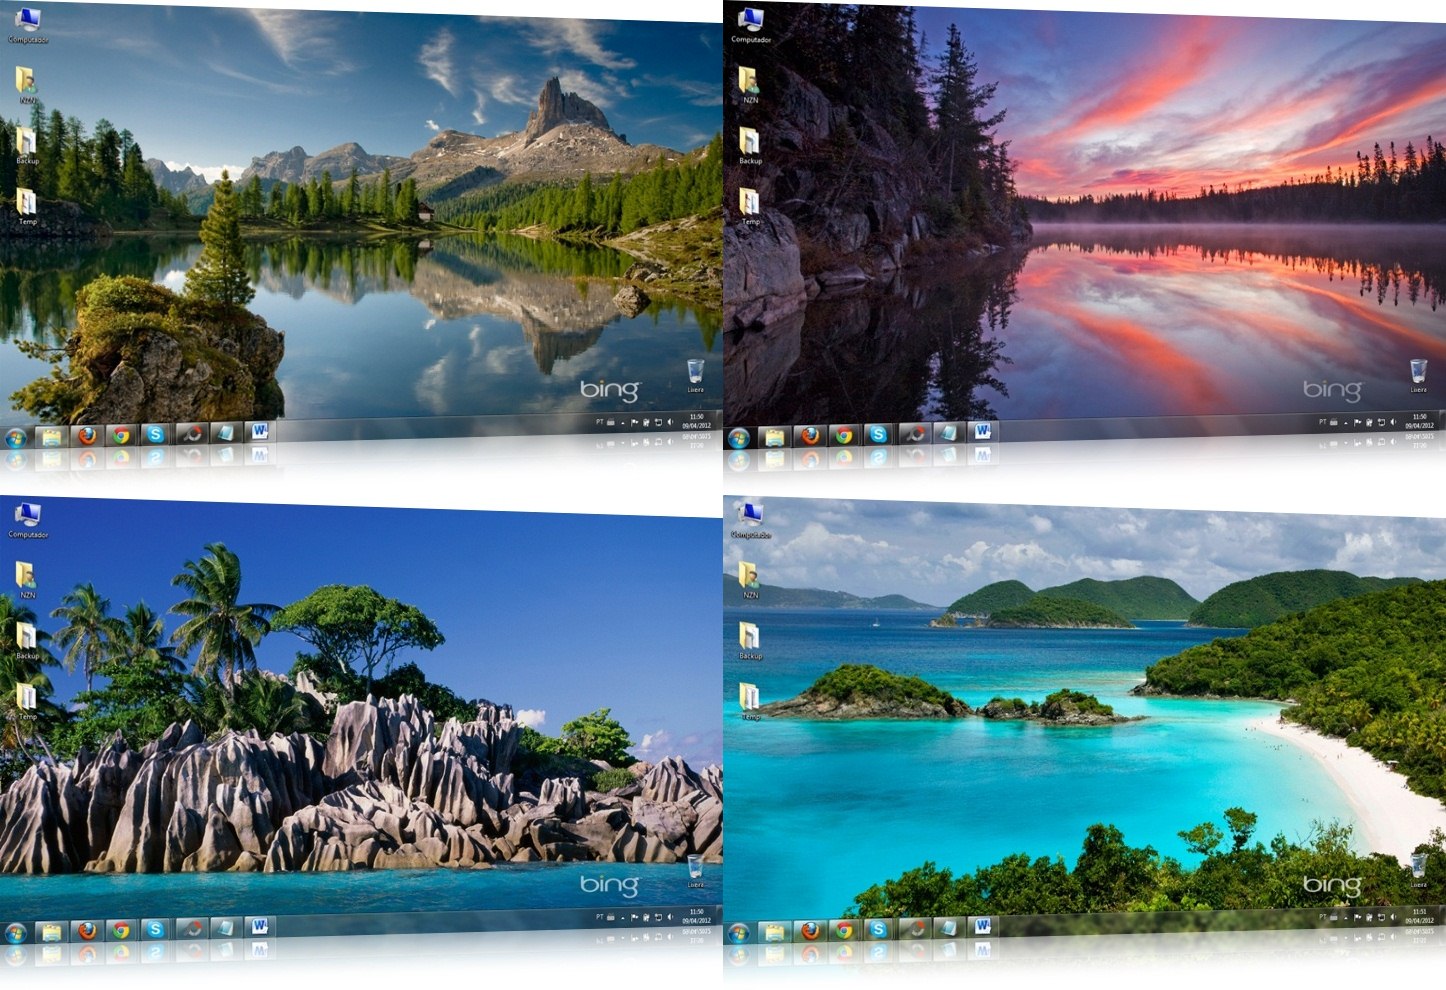 Bing Wallpaper Pack From Microsoft Greeting Cards